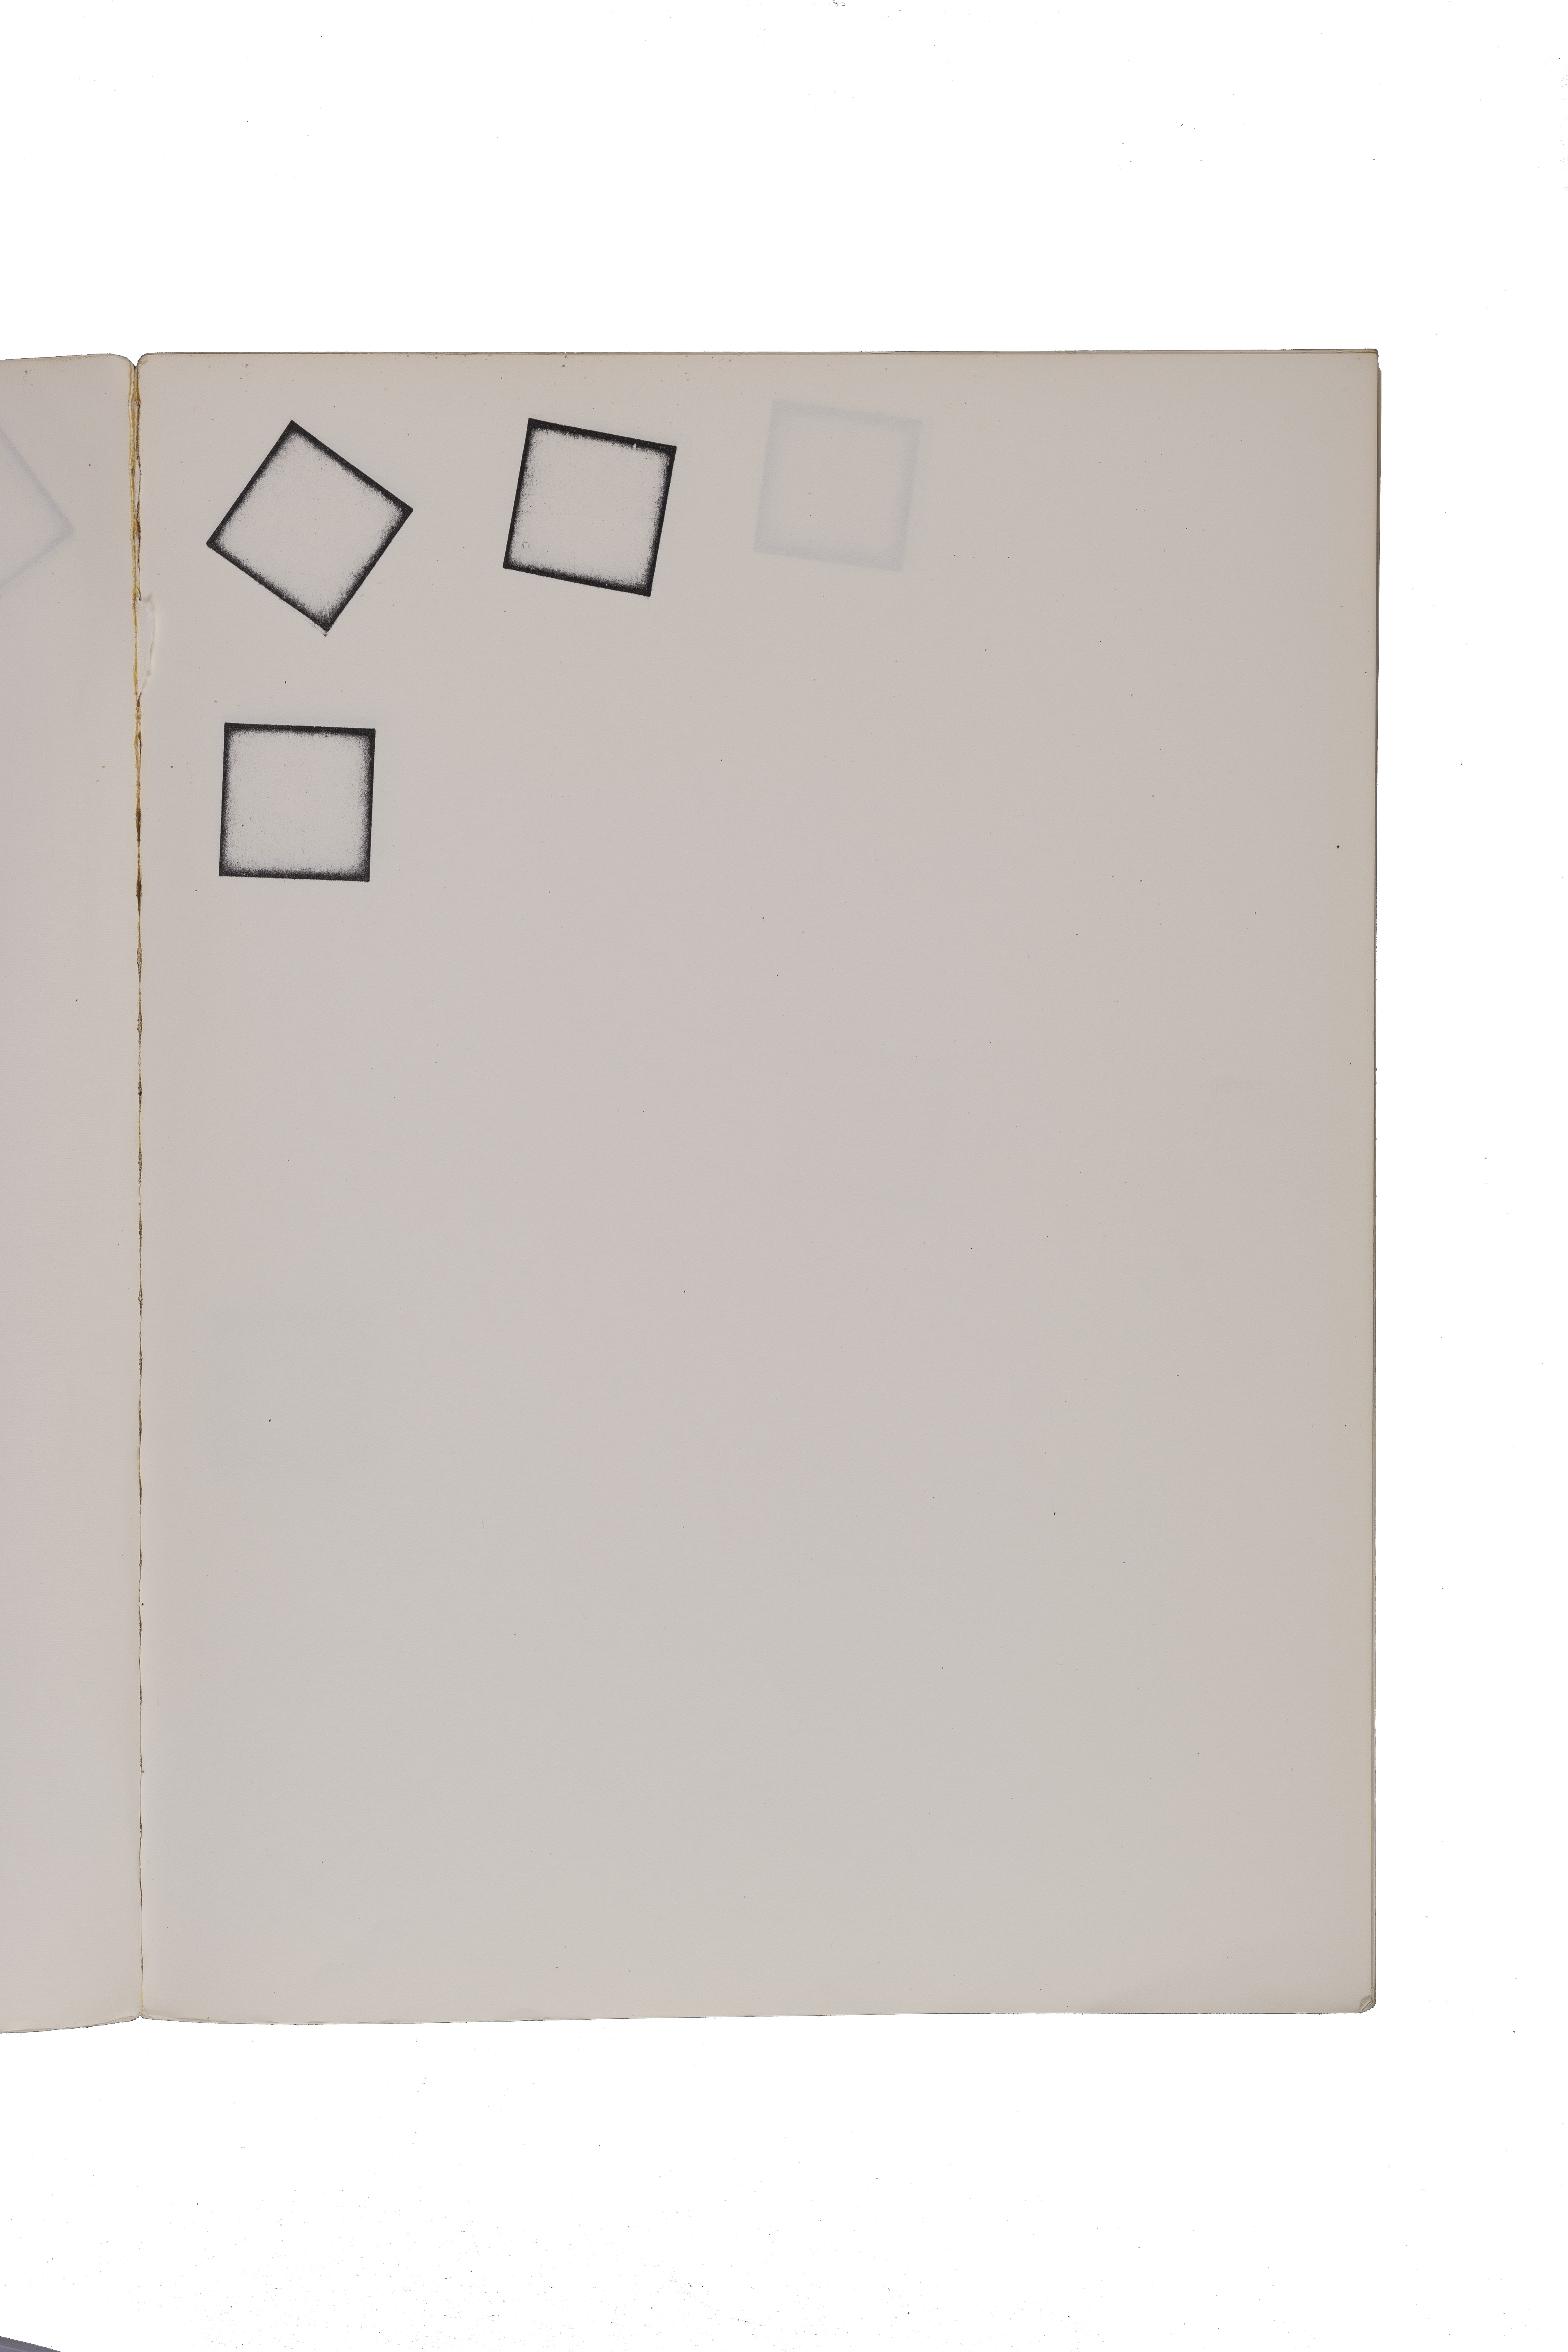 Seth Siegelaub and Jack Wendler: The Xerox book, 1969 (this page: Carl Andre)